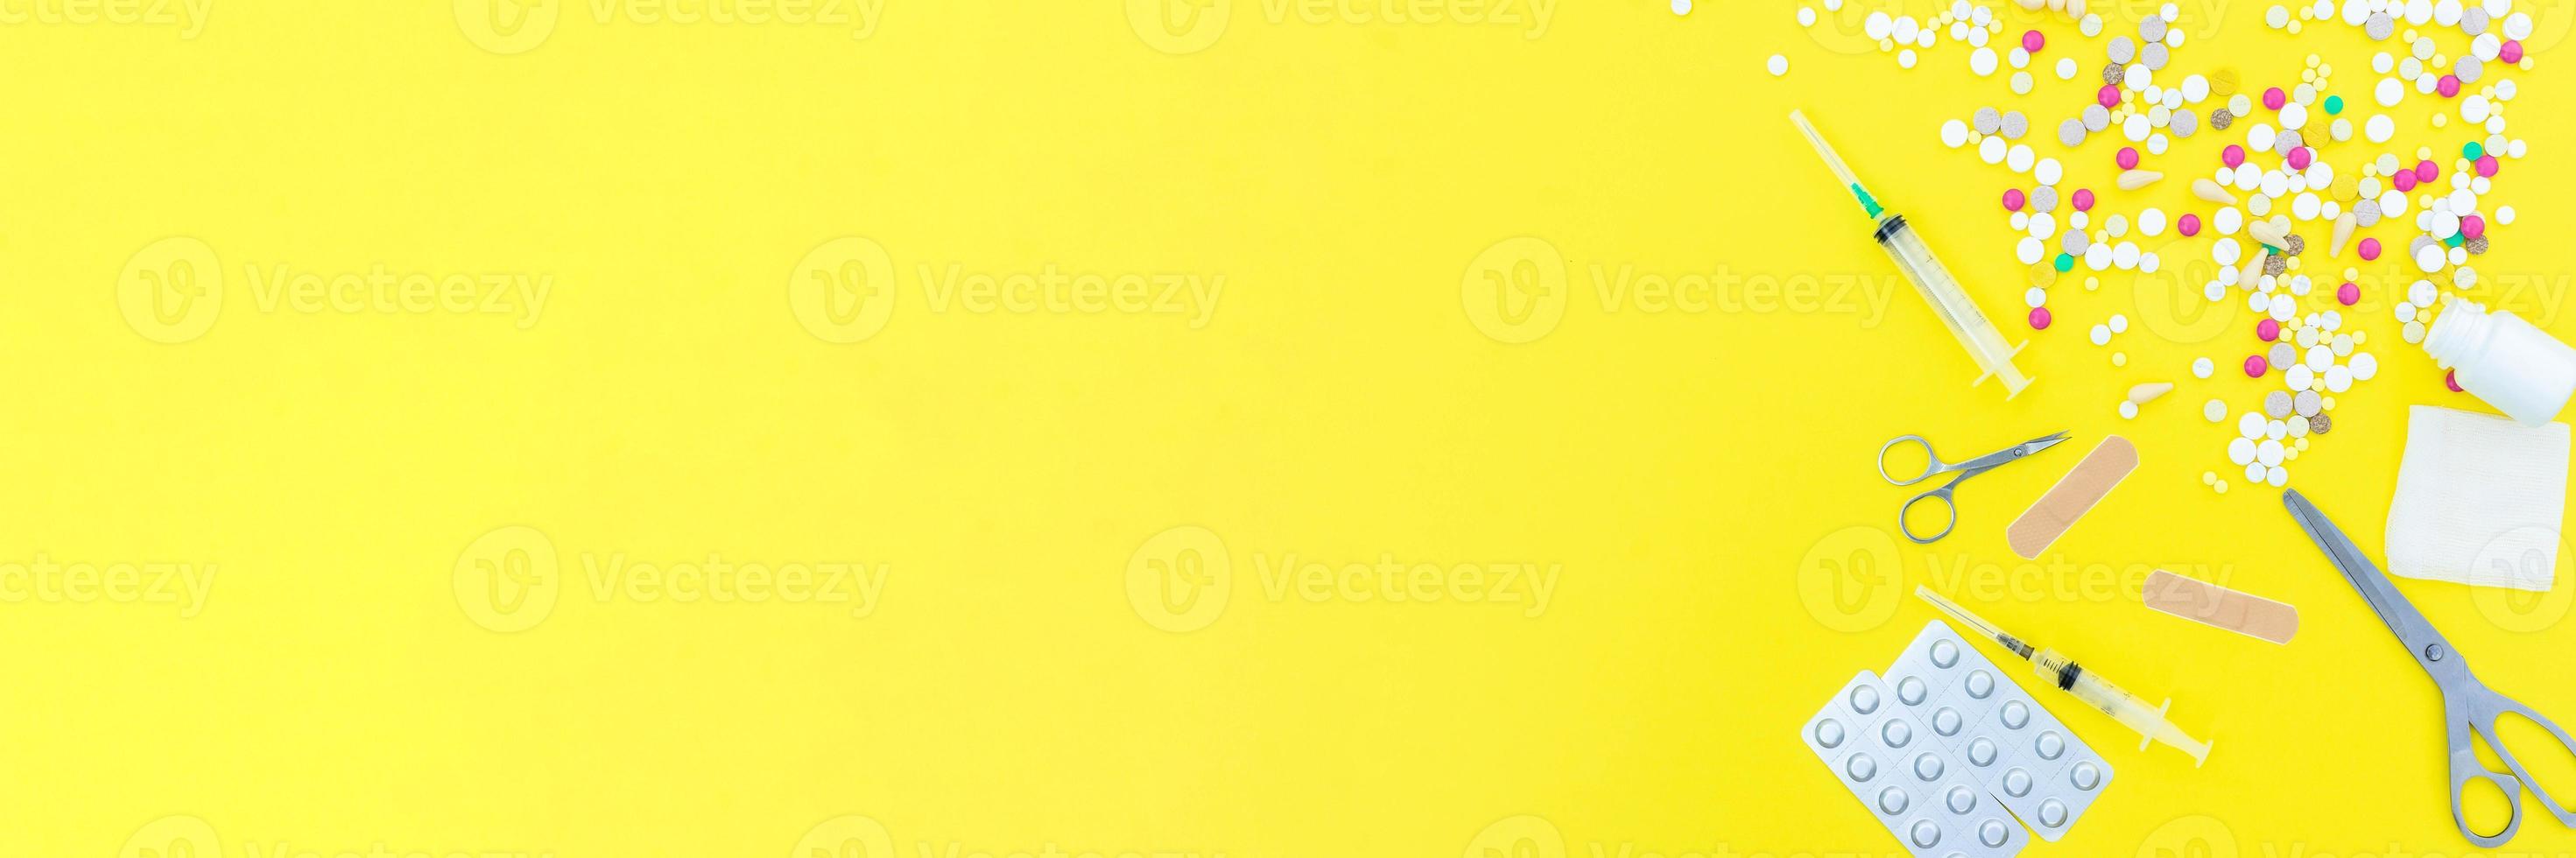 pills on a yellow background photo